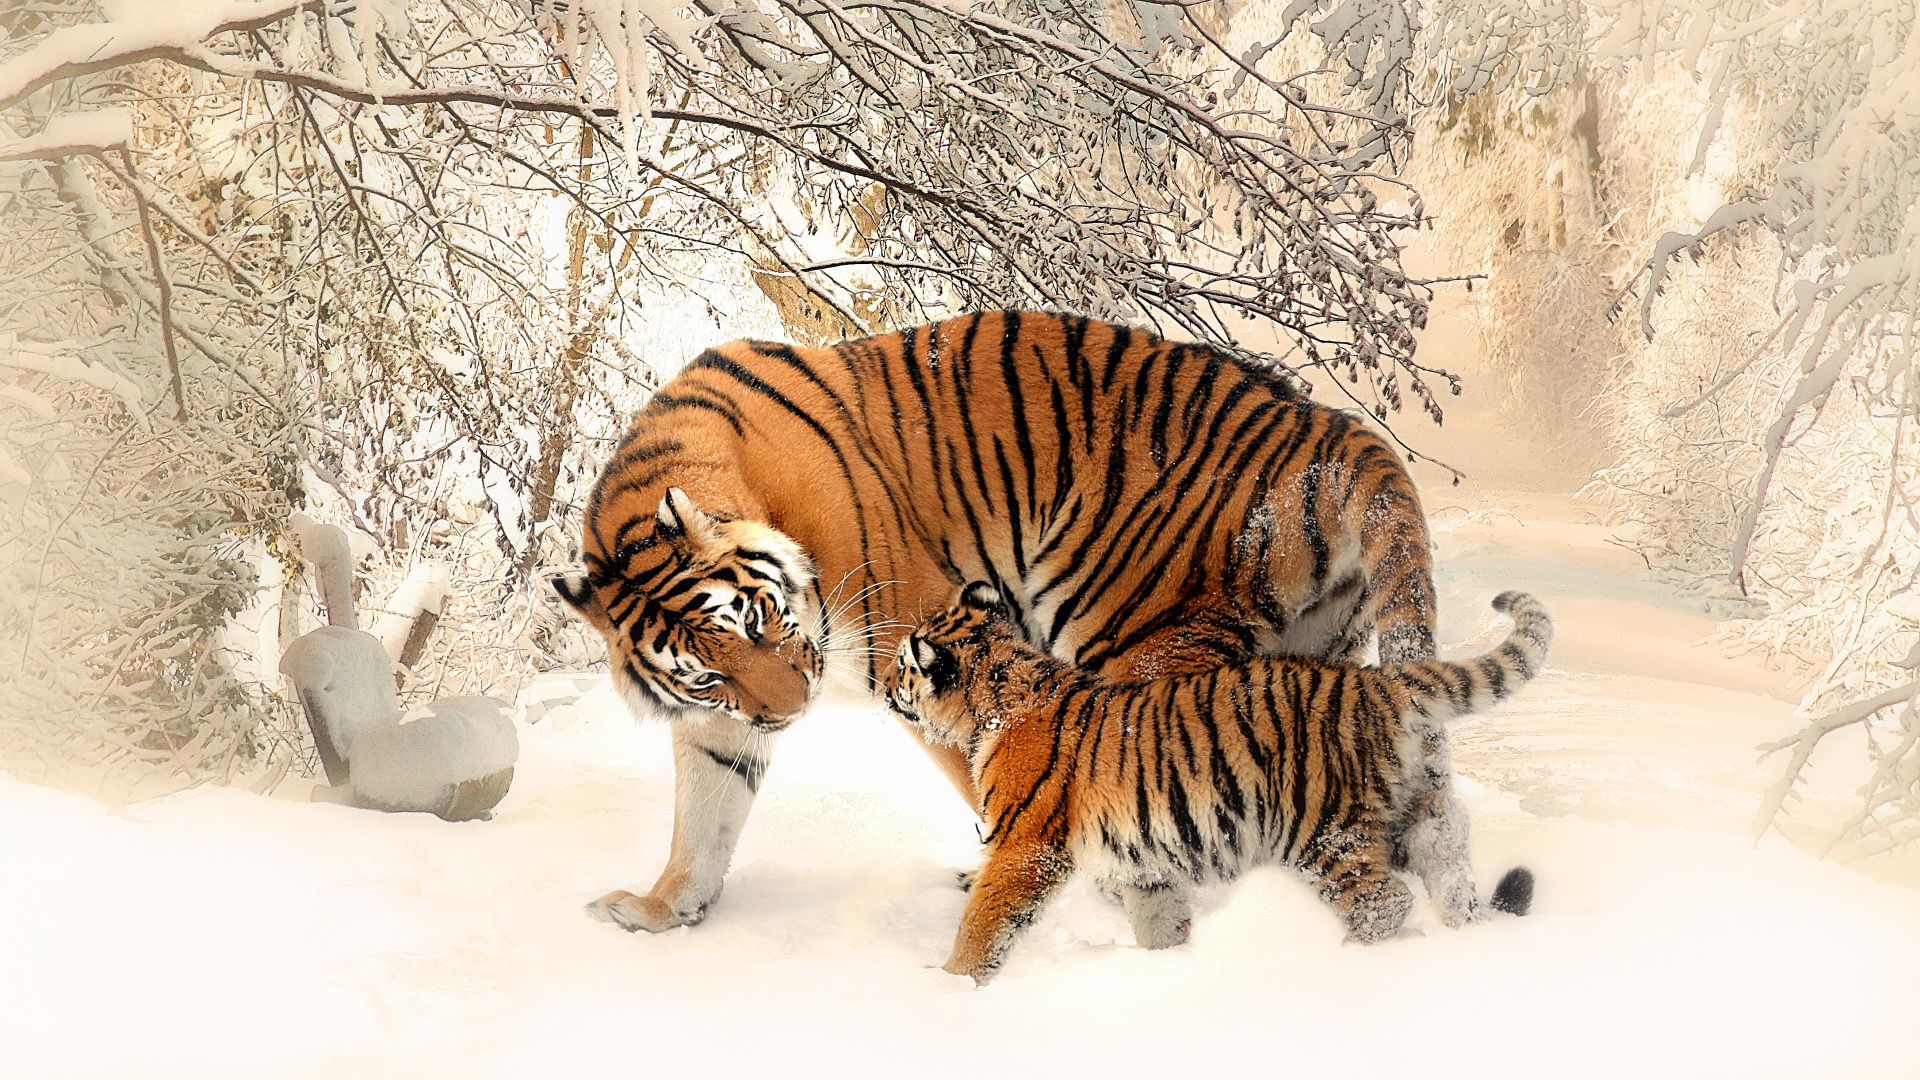 Tiger Walking on Snow Covered Ground During Daytime. Wallpaper in 1920x1080 Resolution